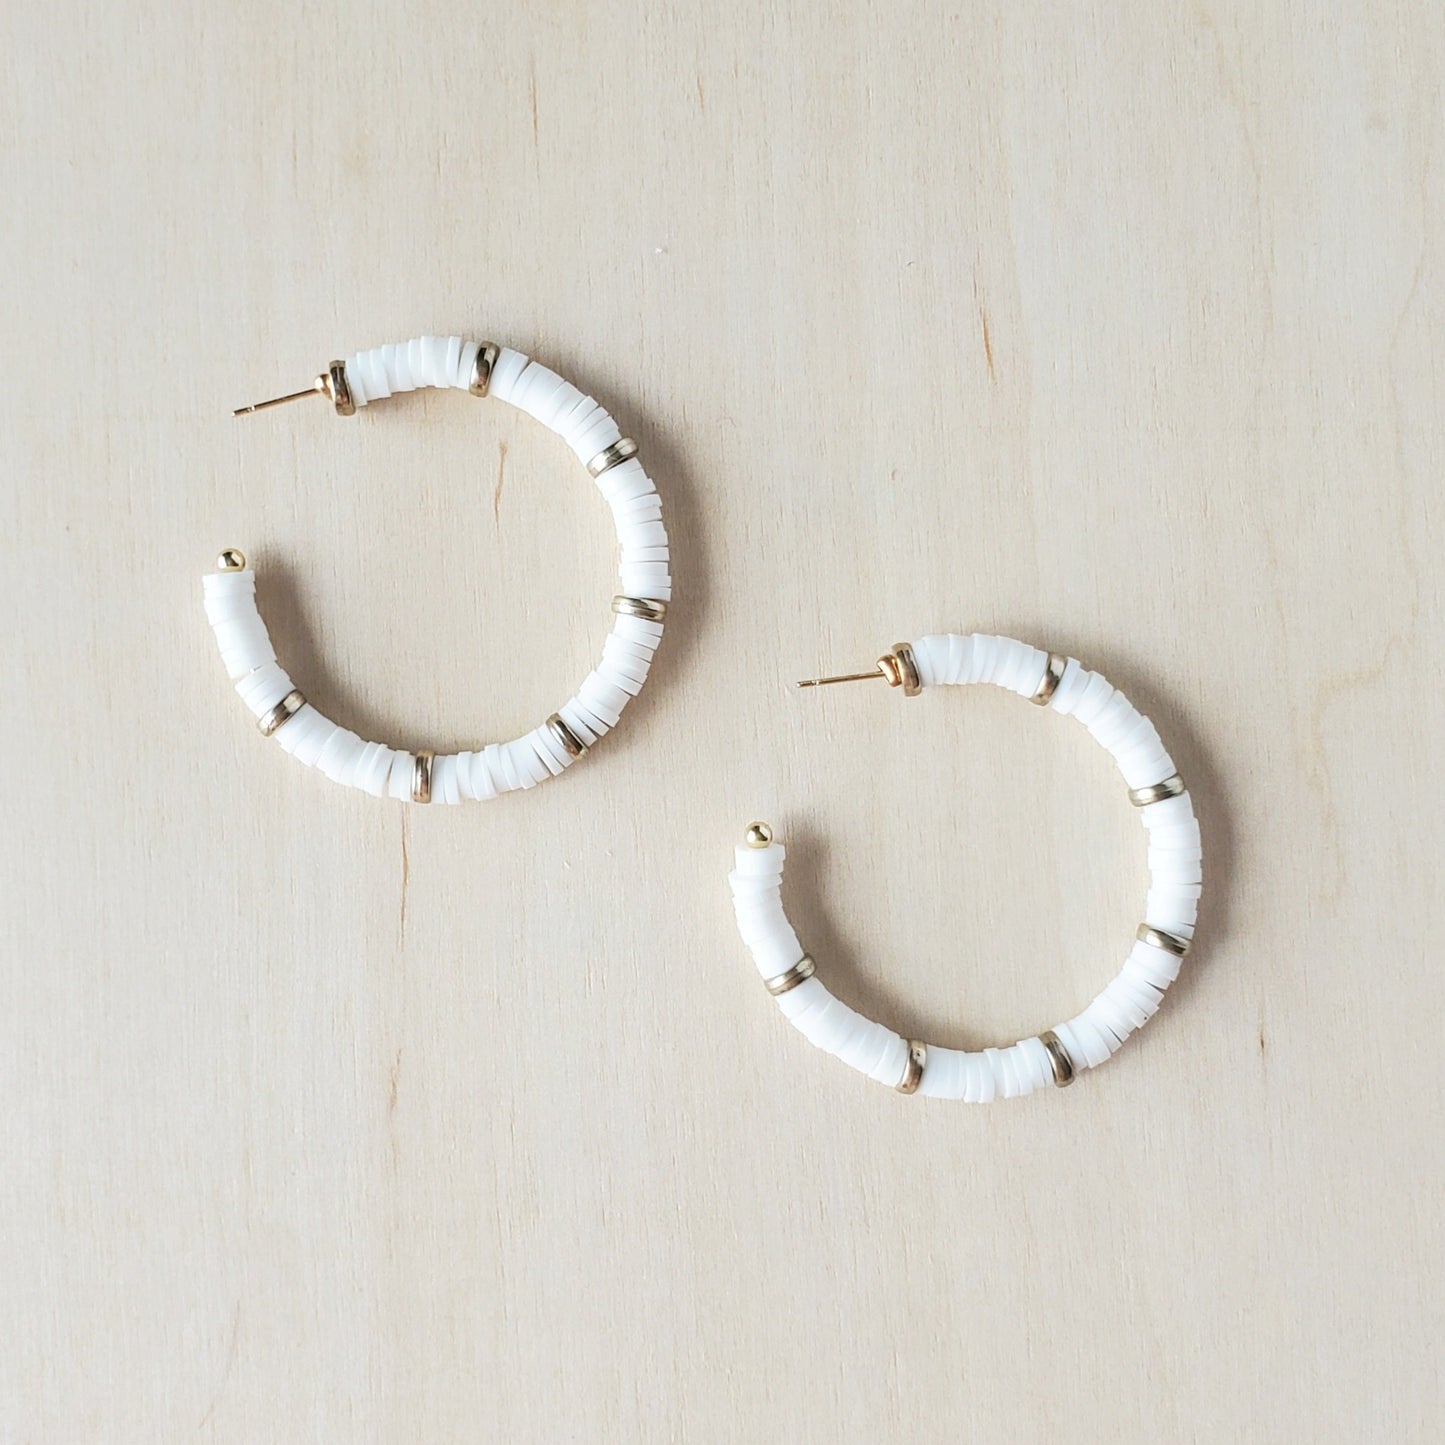 A pair of white and gold polymer clay hoop earrings rest on a wooden background